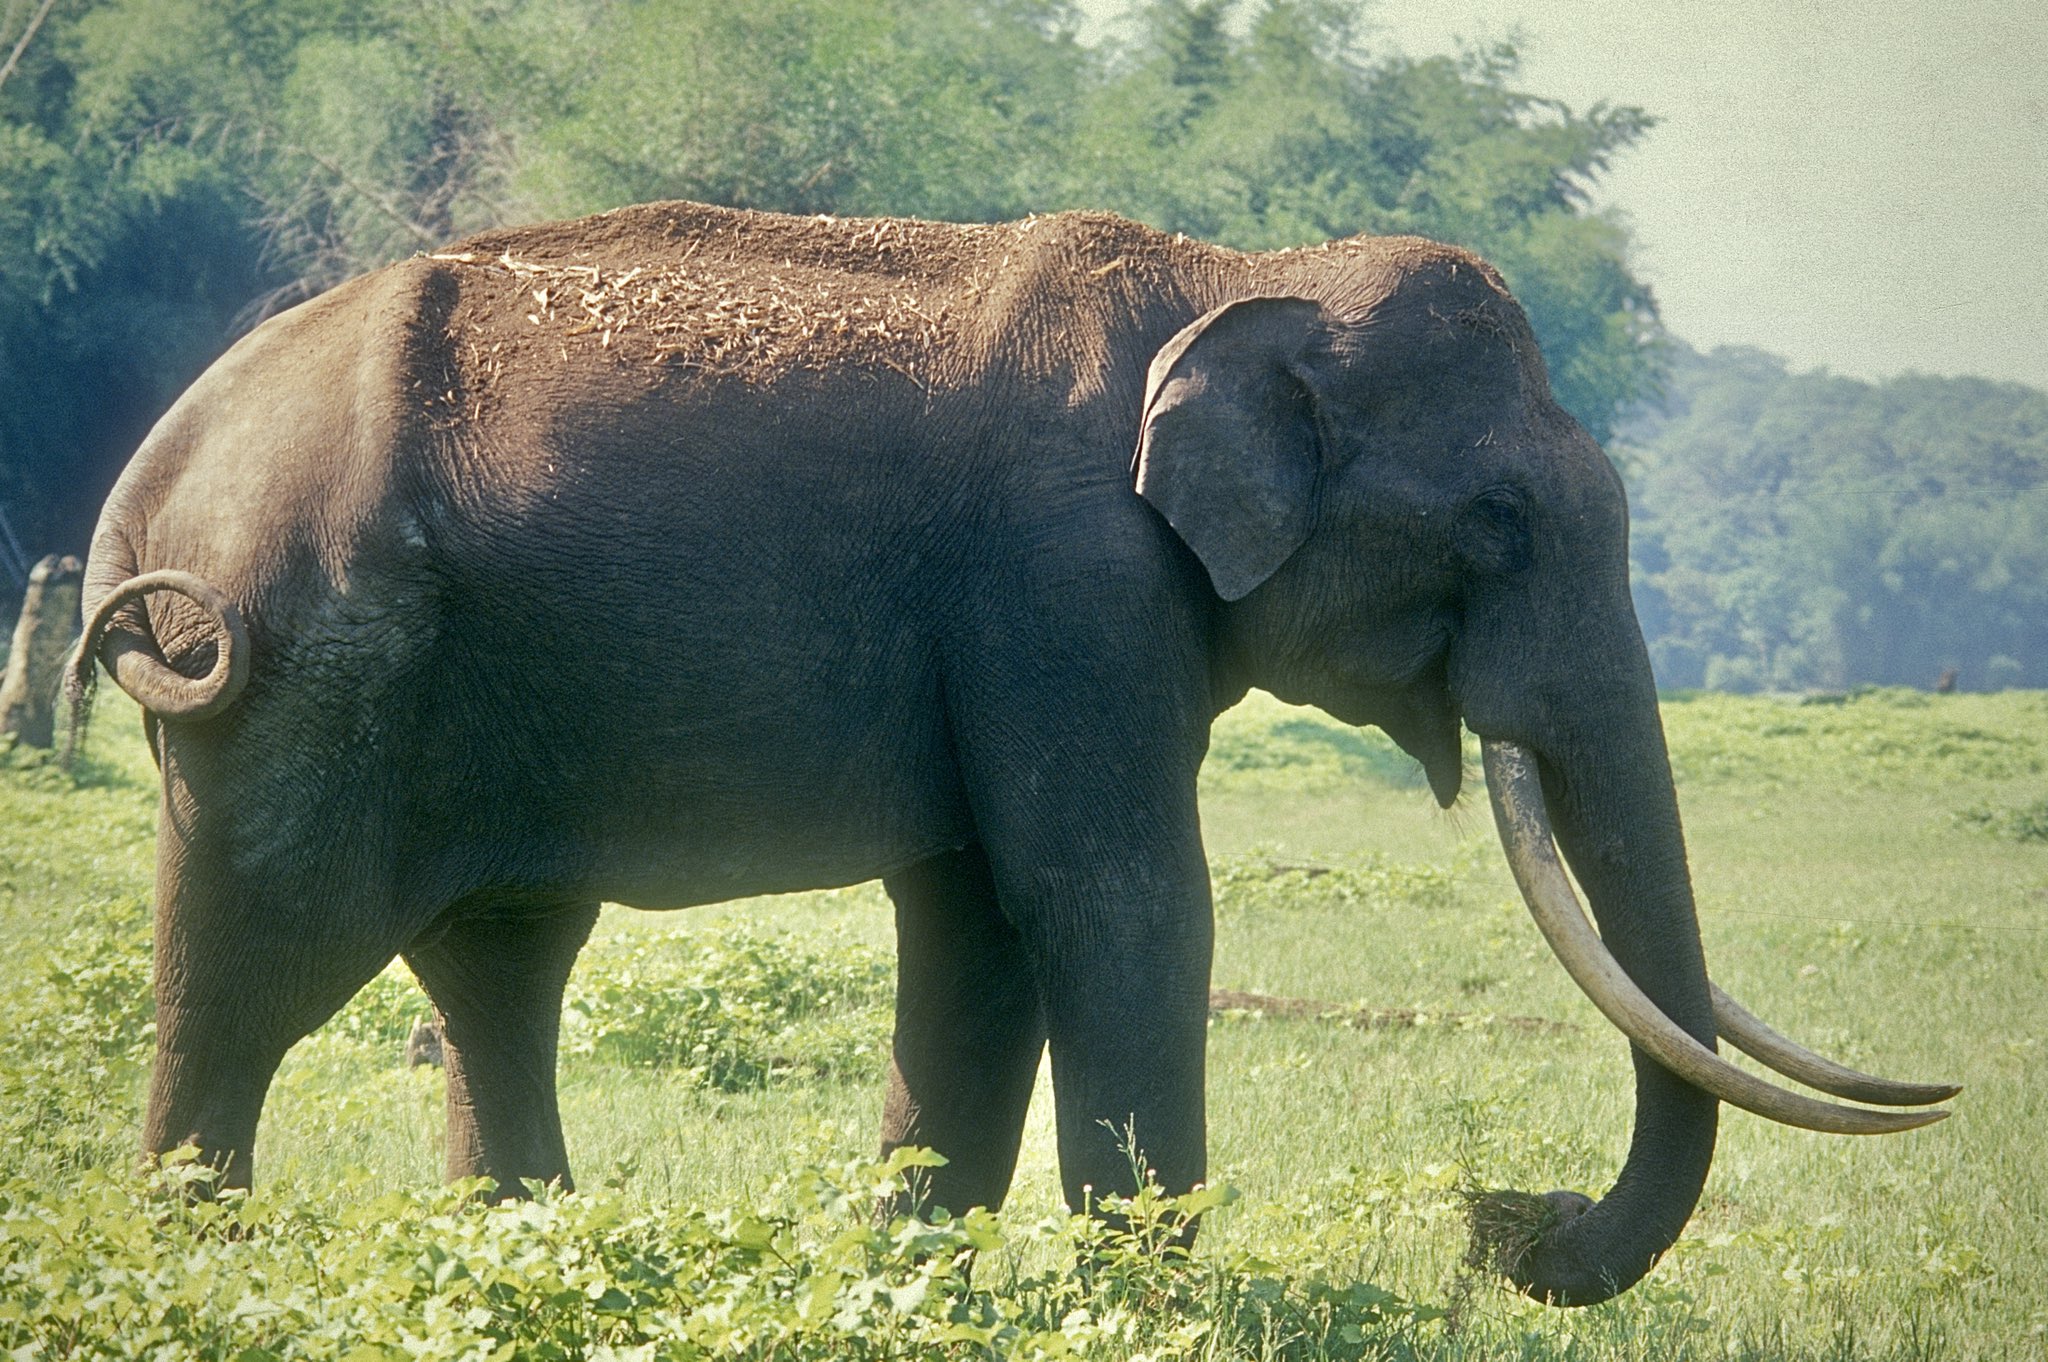 Bhogeshwara the elephant with the longest tusks died his connection with sandalwood smuggler veerappan